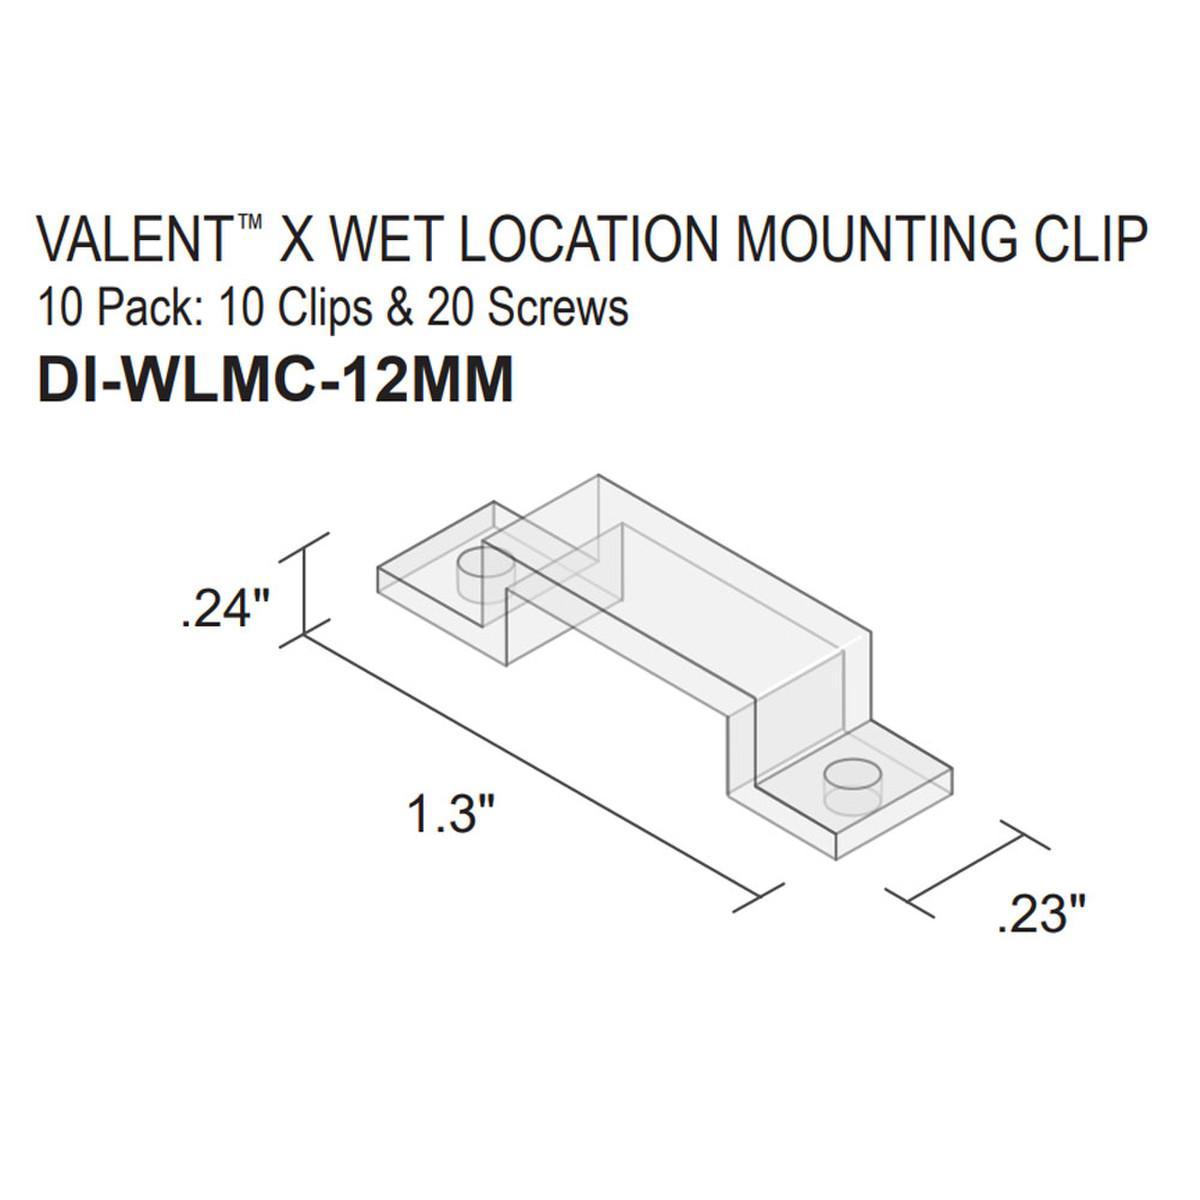 Silicone Mounting Clips for Valent X Wet Location Strip Lights, Pack of 10 Clips & 20 Screws